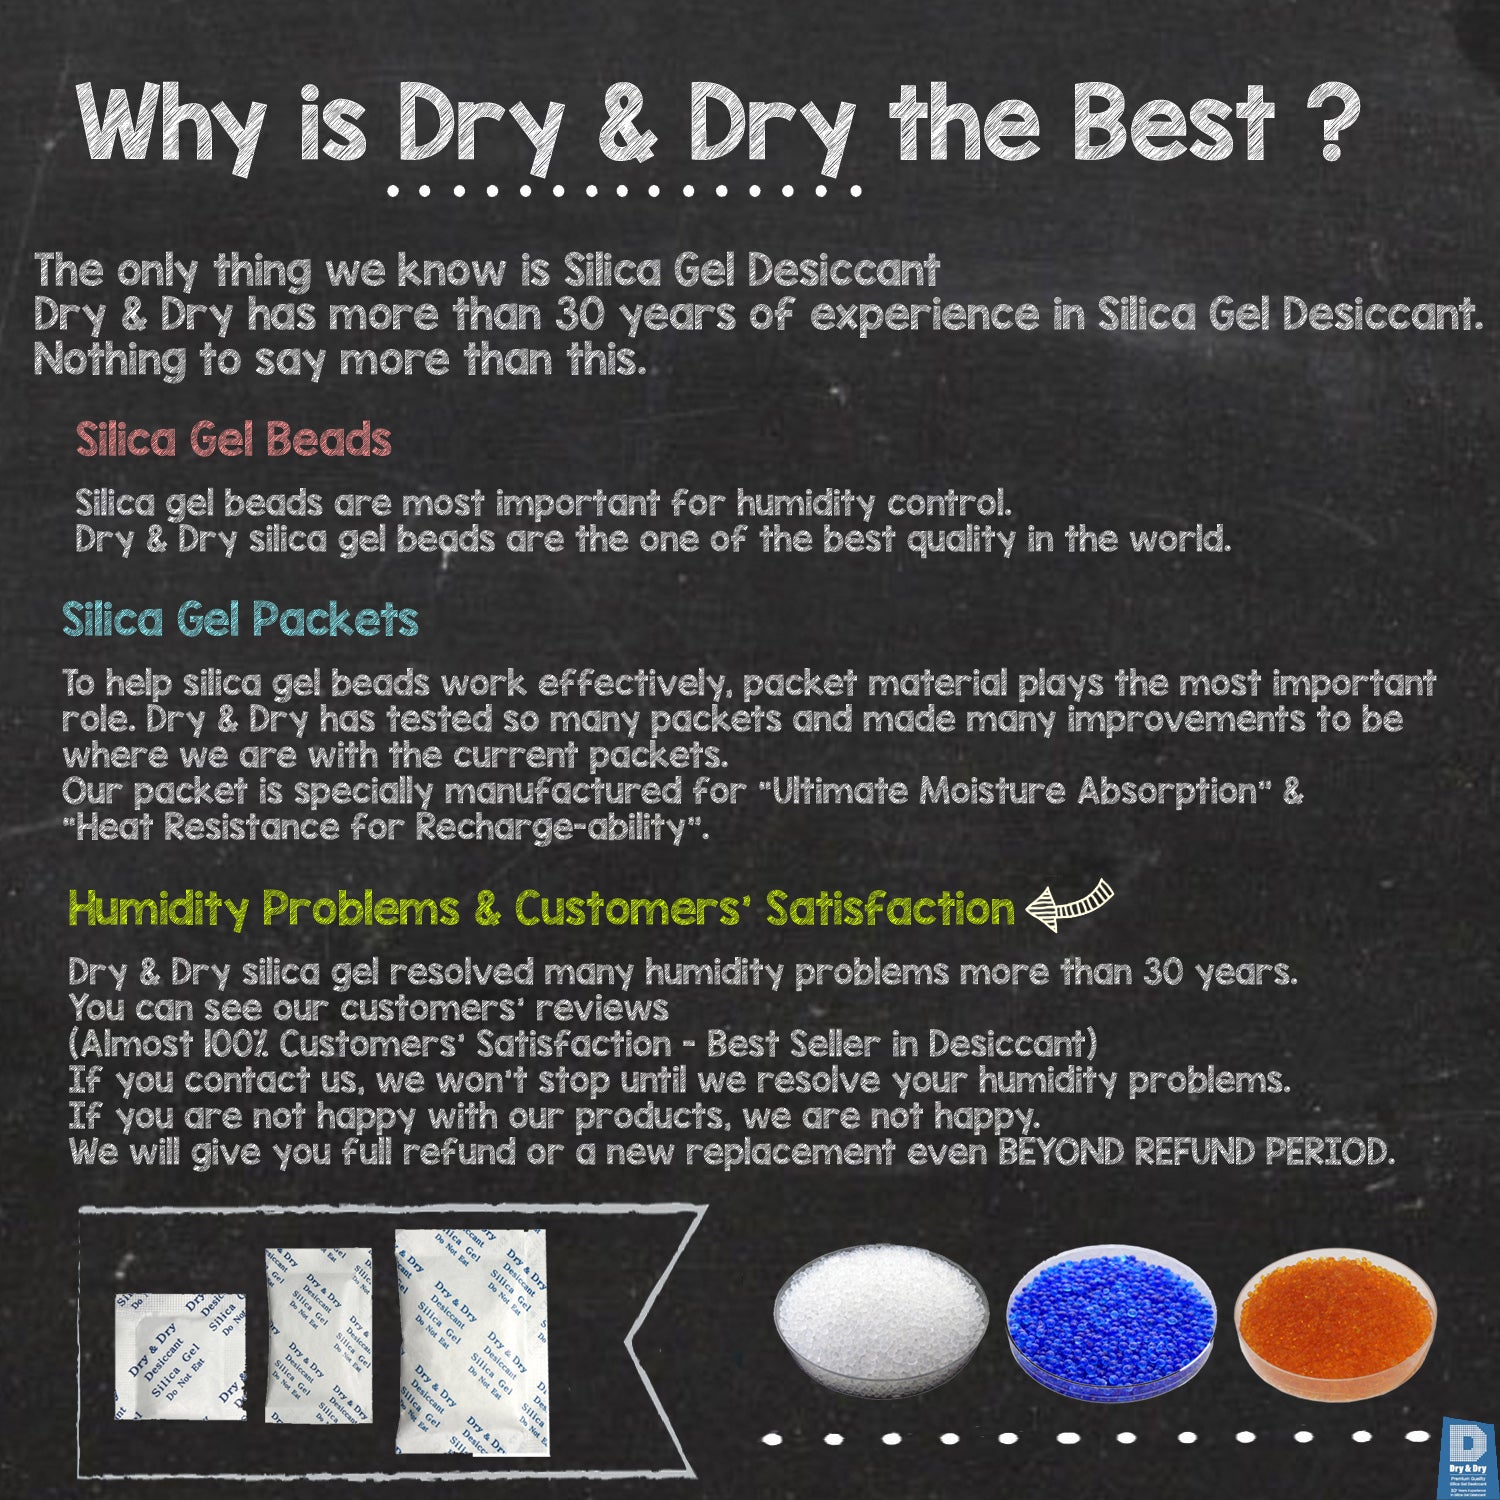 8 Gallon (56-60 LBS) "Dry & Dry" High Quality Mixed Silica Gel Desiccant Beads - Rechargeable